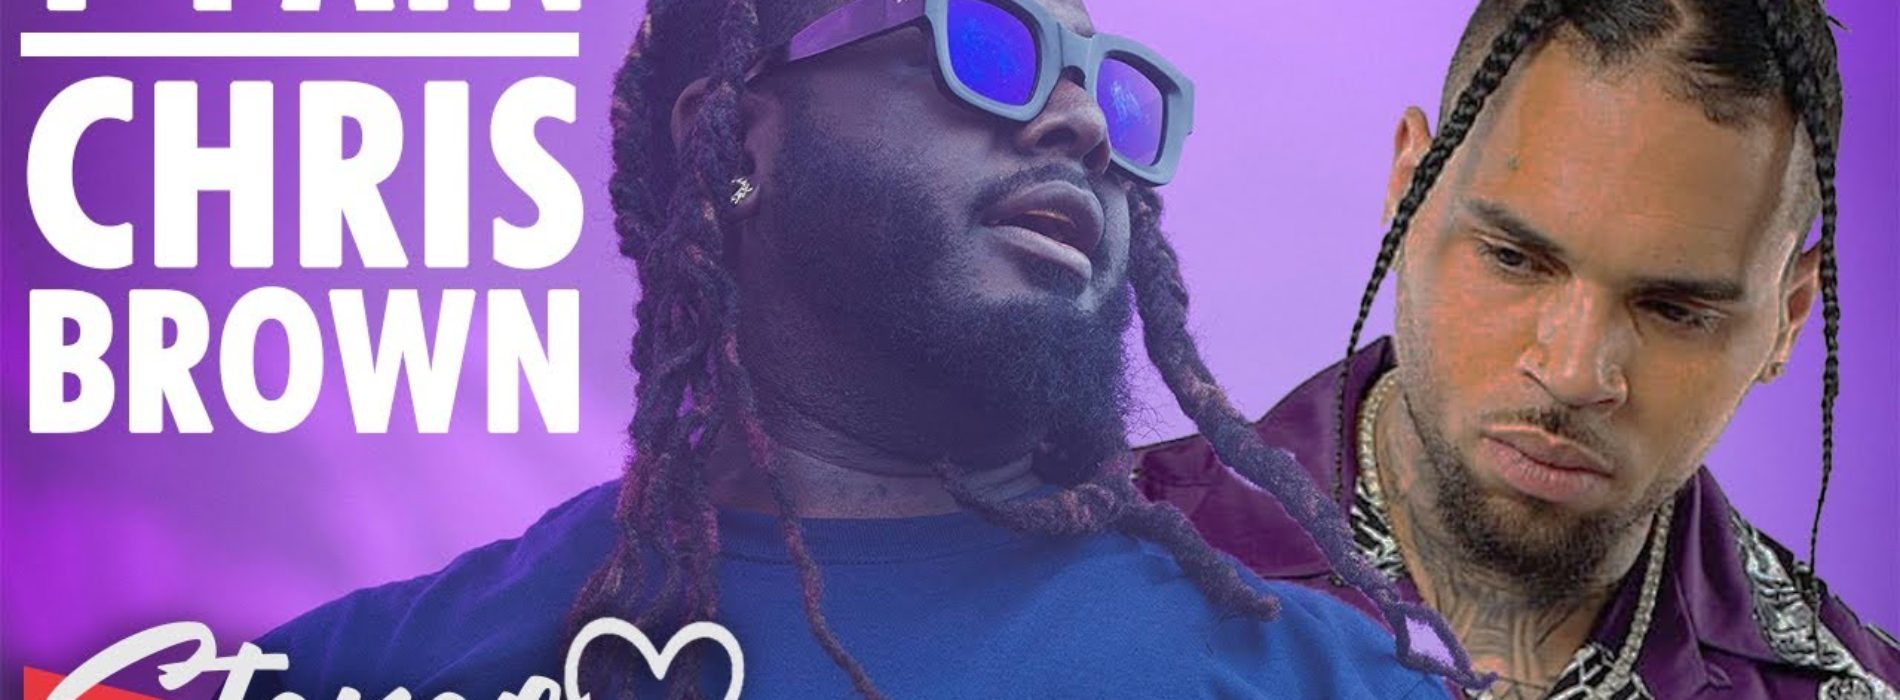 T Pain ft. Chris Brown – Wake Up Dead (Audio) – Avril 2020